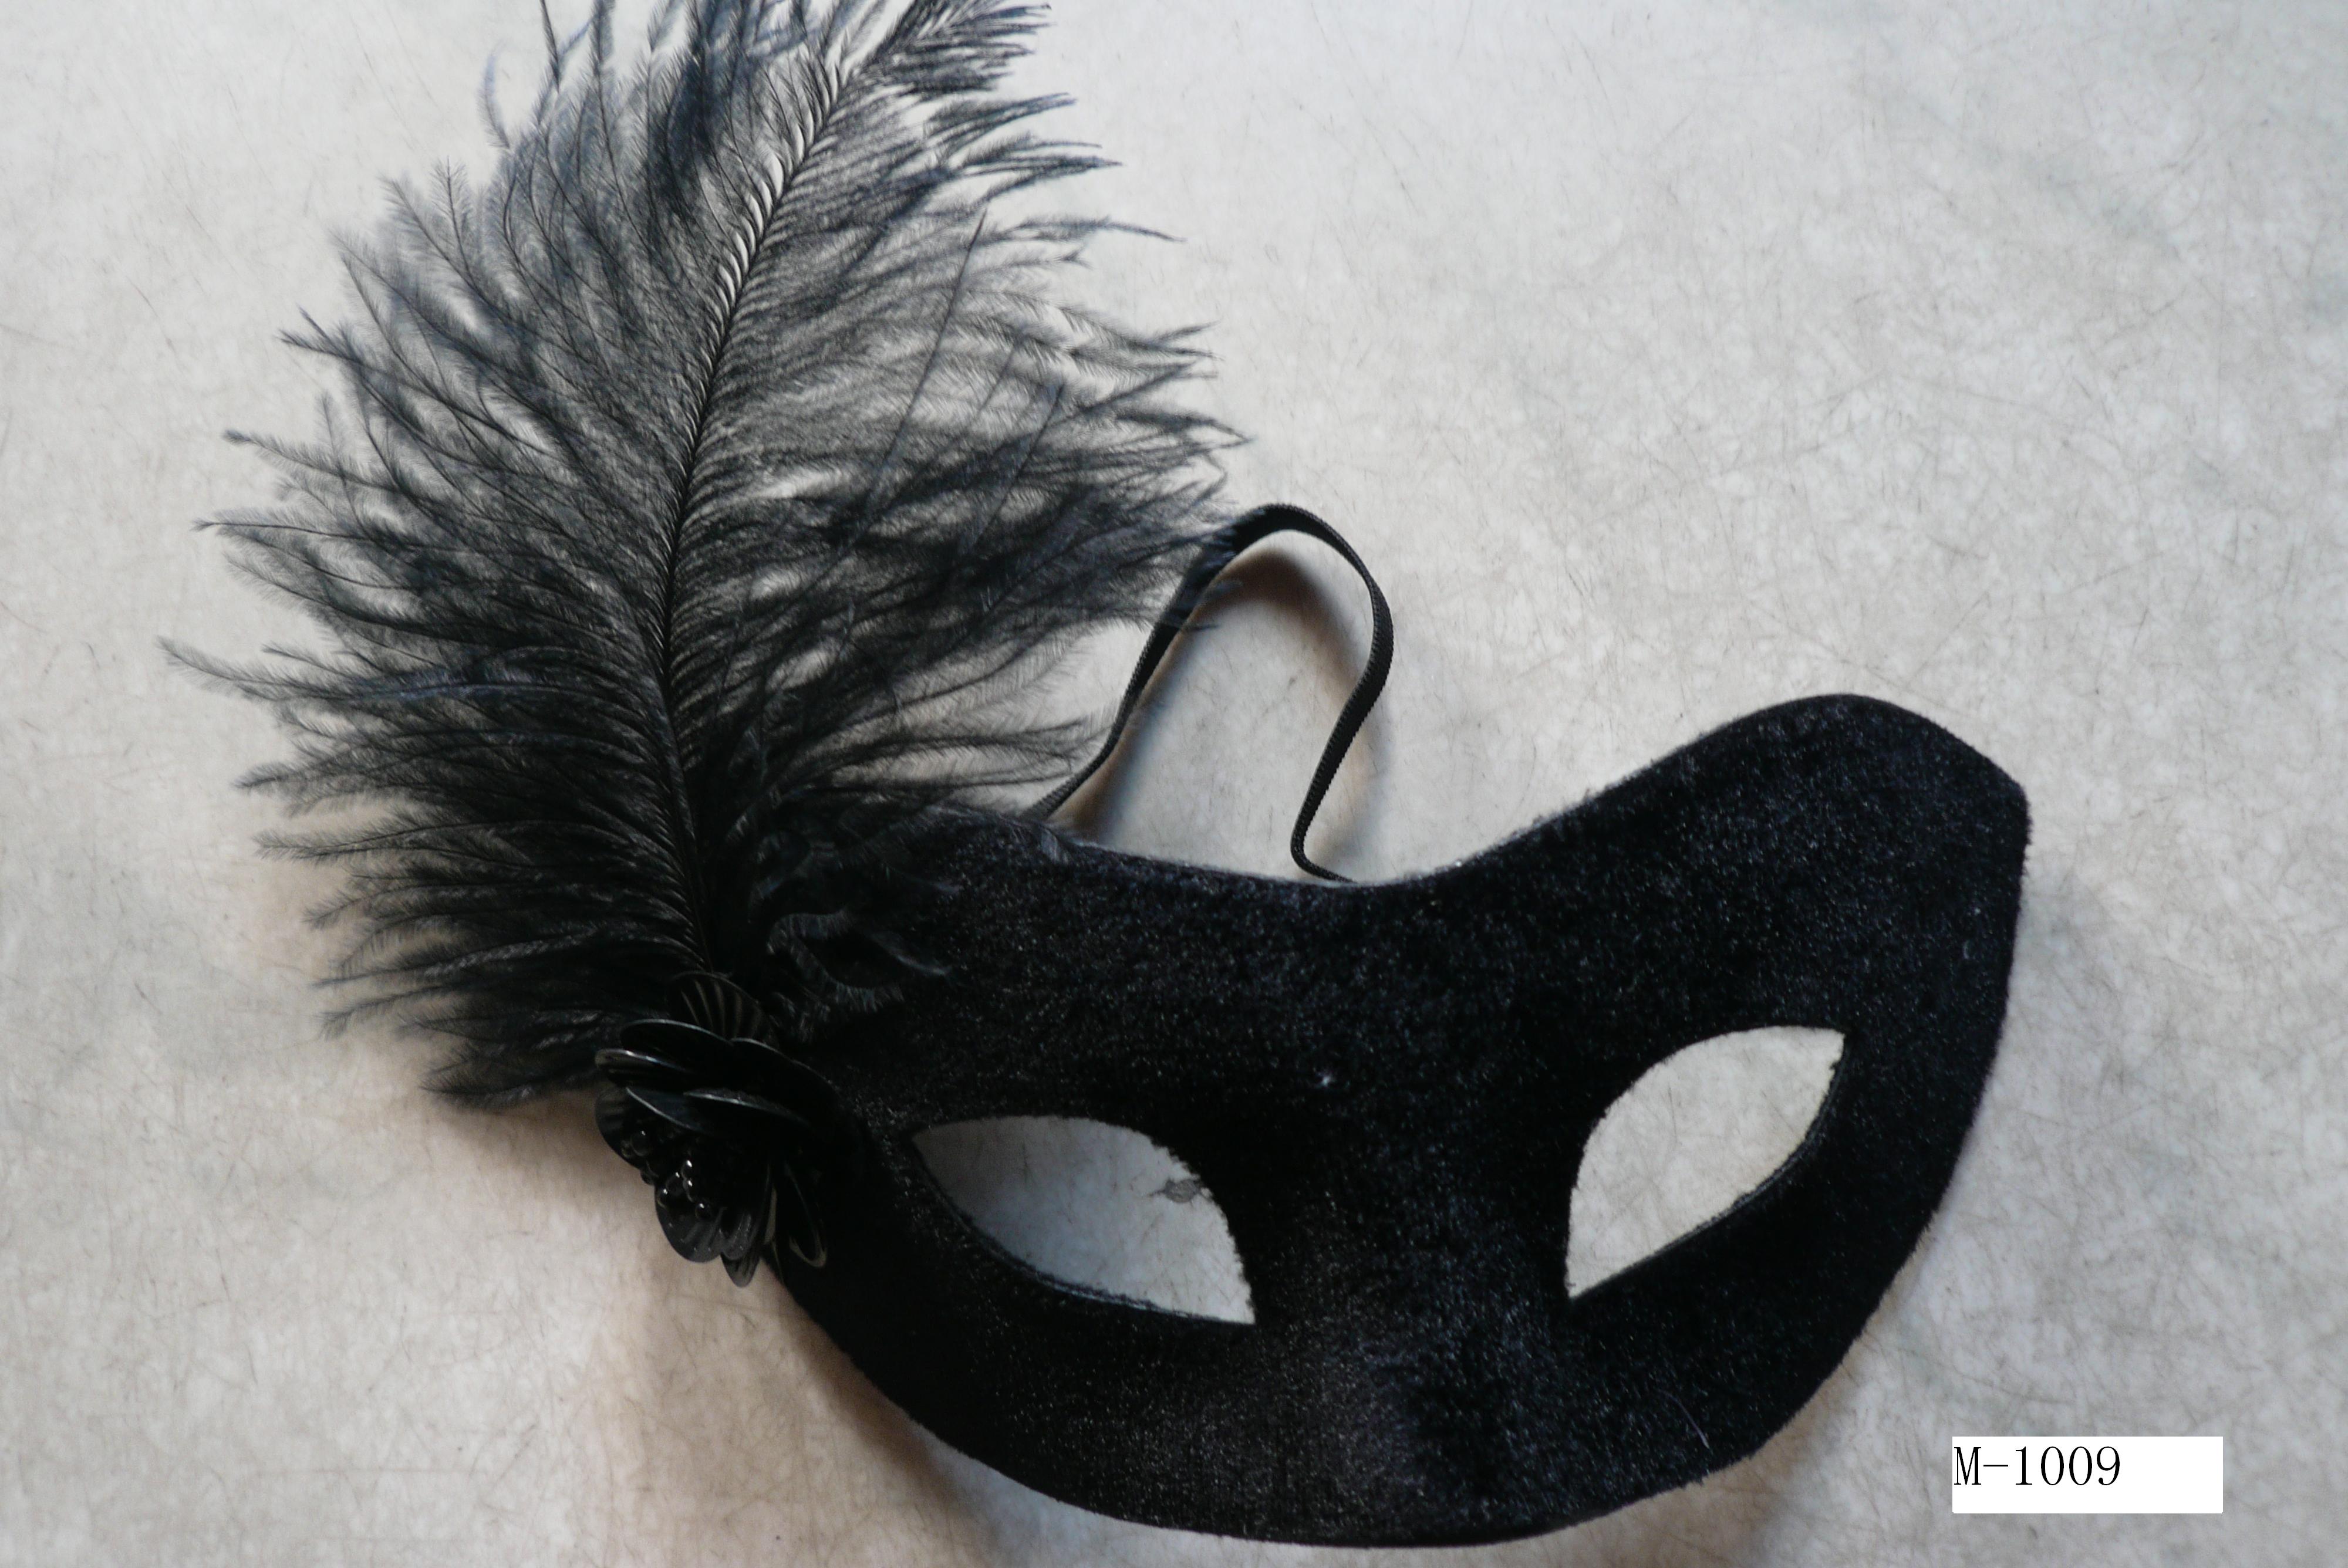 Cheap feather masks for sale - Made in China M-1009